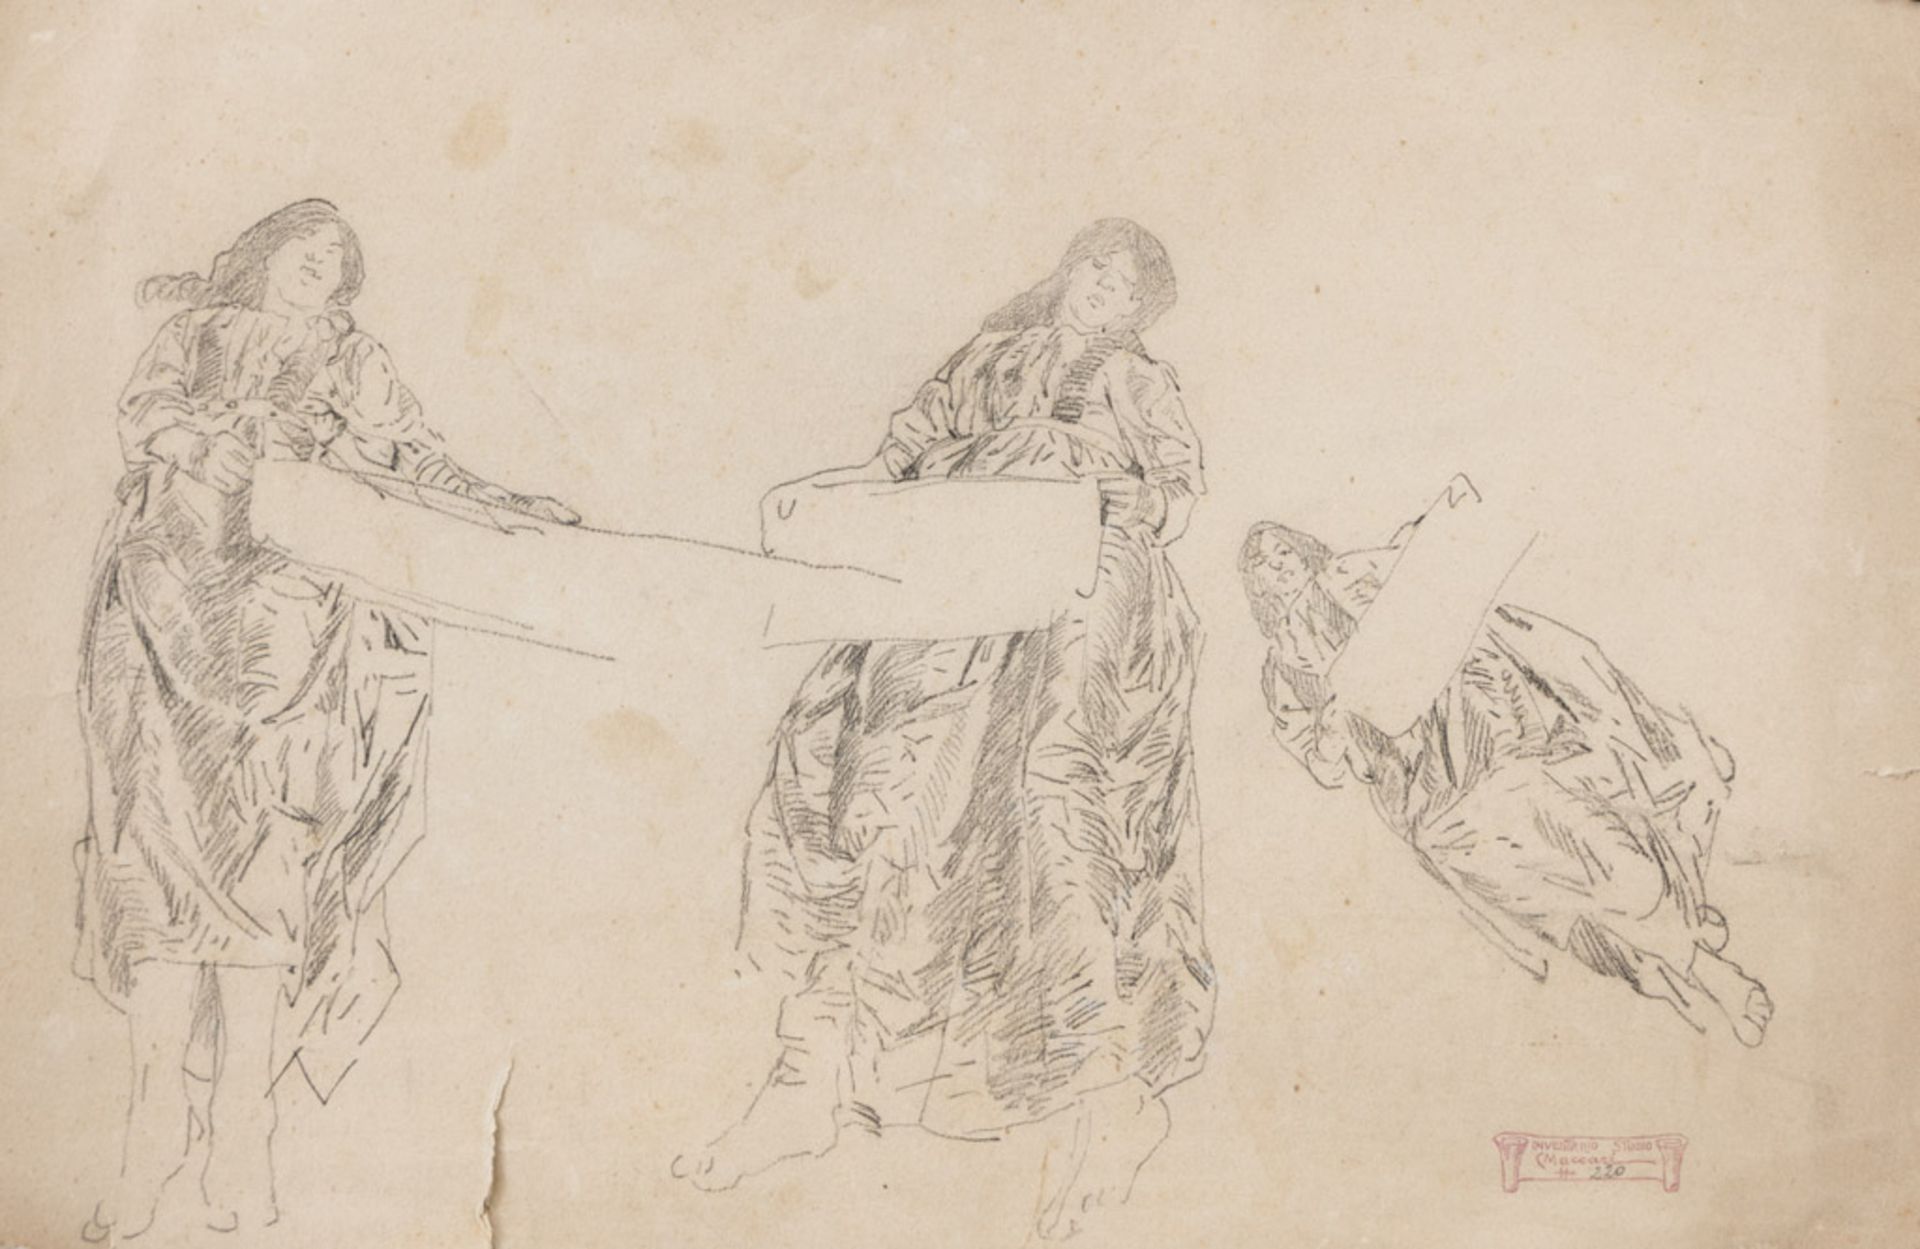 CESARE MACCARI (Siena 1840 - Rome 1919) STUDIES OF FIGURES Seven pencils and inks on paper, cm. 29 x - Image 2 of 2